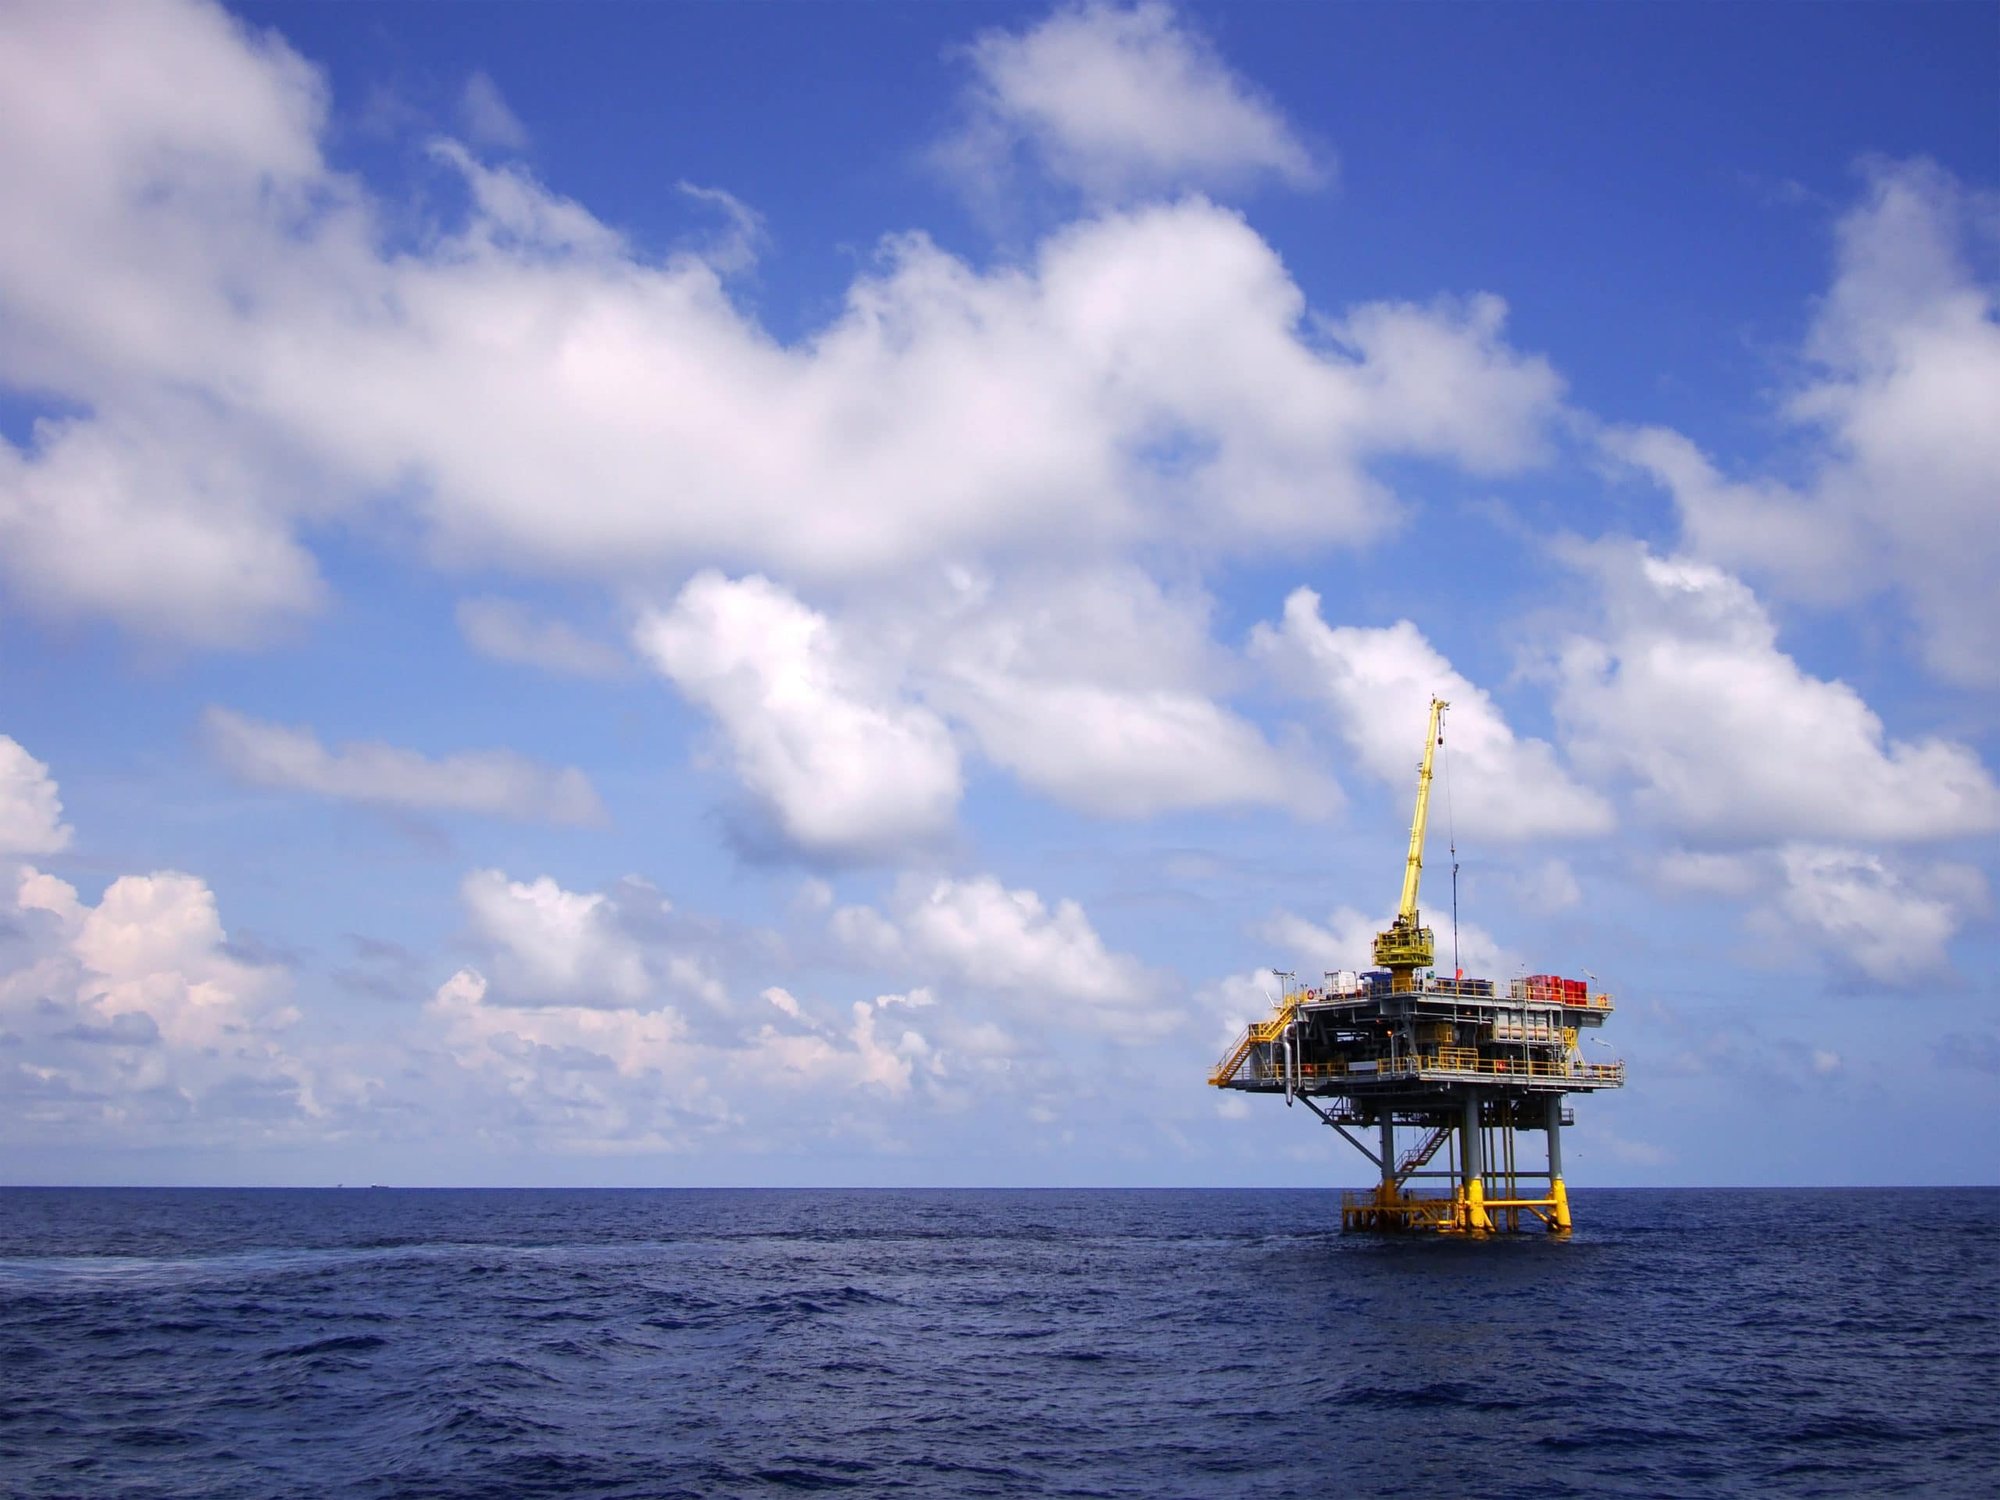 Subsea Oil and Gas Rig with Calm Sea and Clouds Image